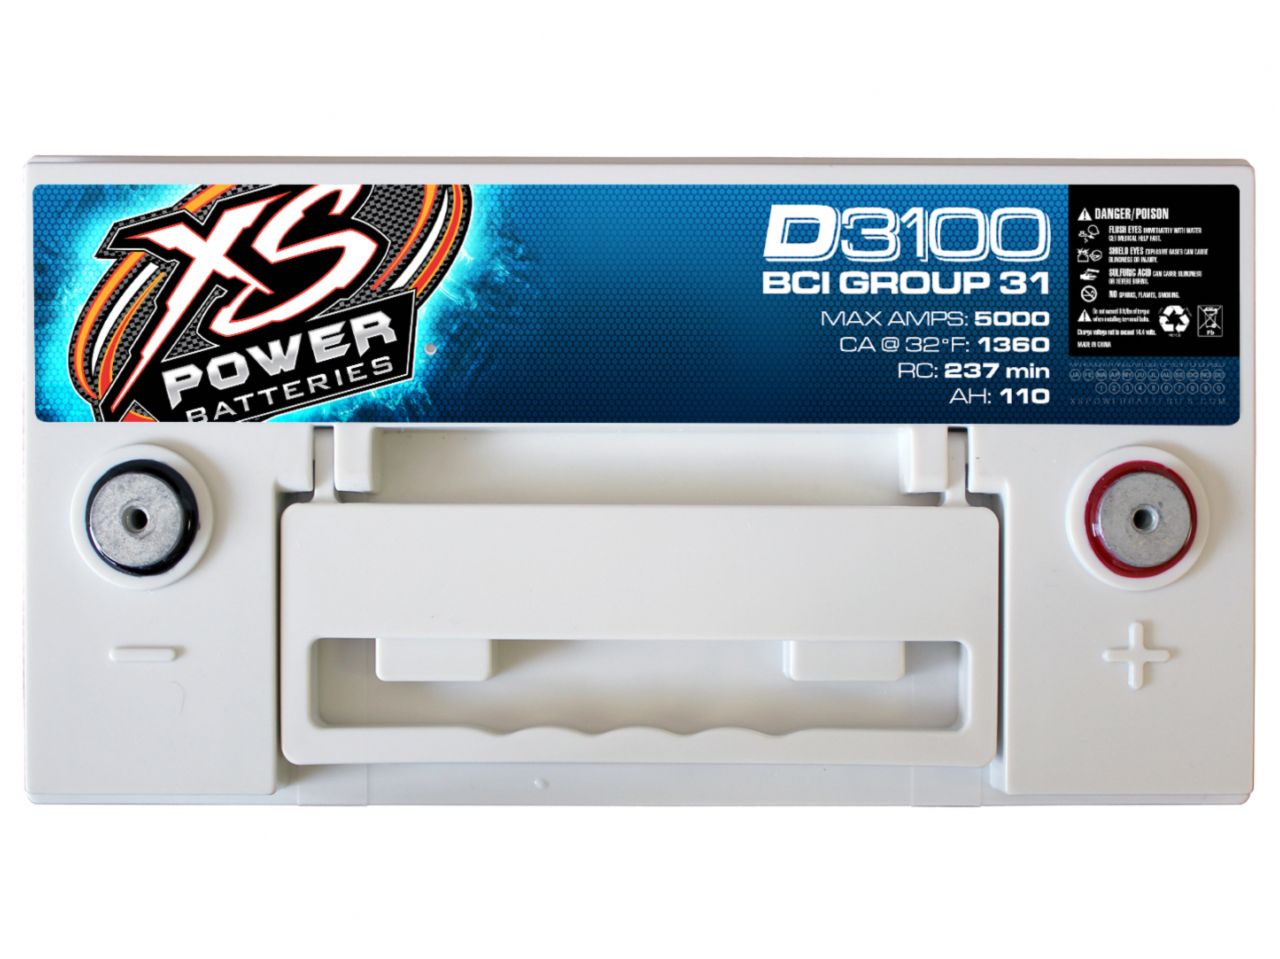 XS Power 12V BCI Group 31 AGM Battery, Max Amps 5000A, CA: 1360, Ah: 110